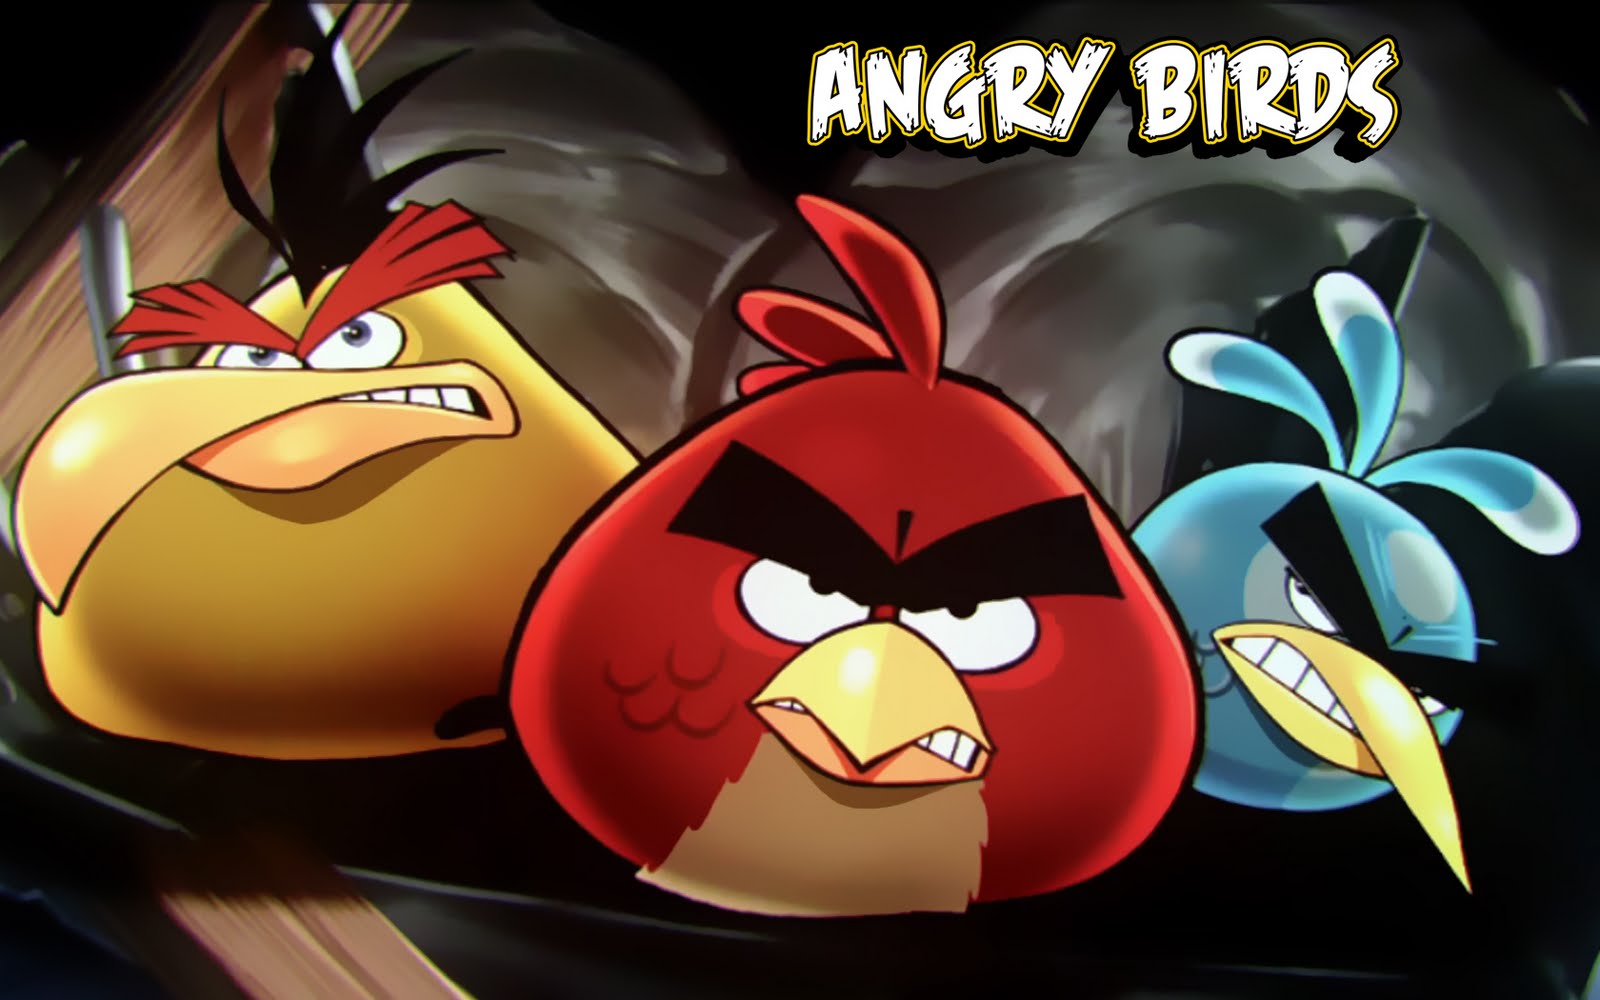 Angry Birds Picture HD dekstop wallpapers   Angry Birds Picture